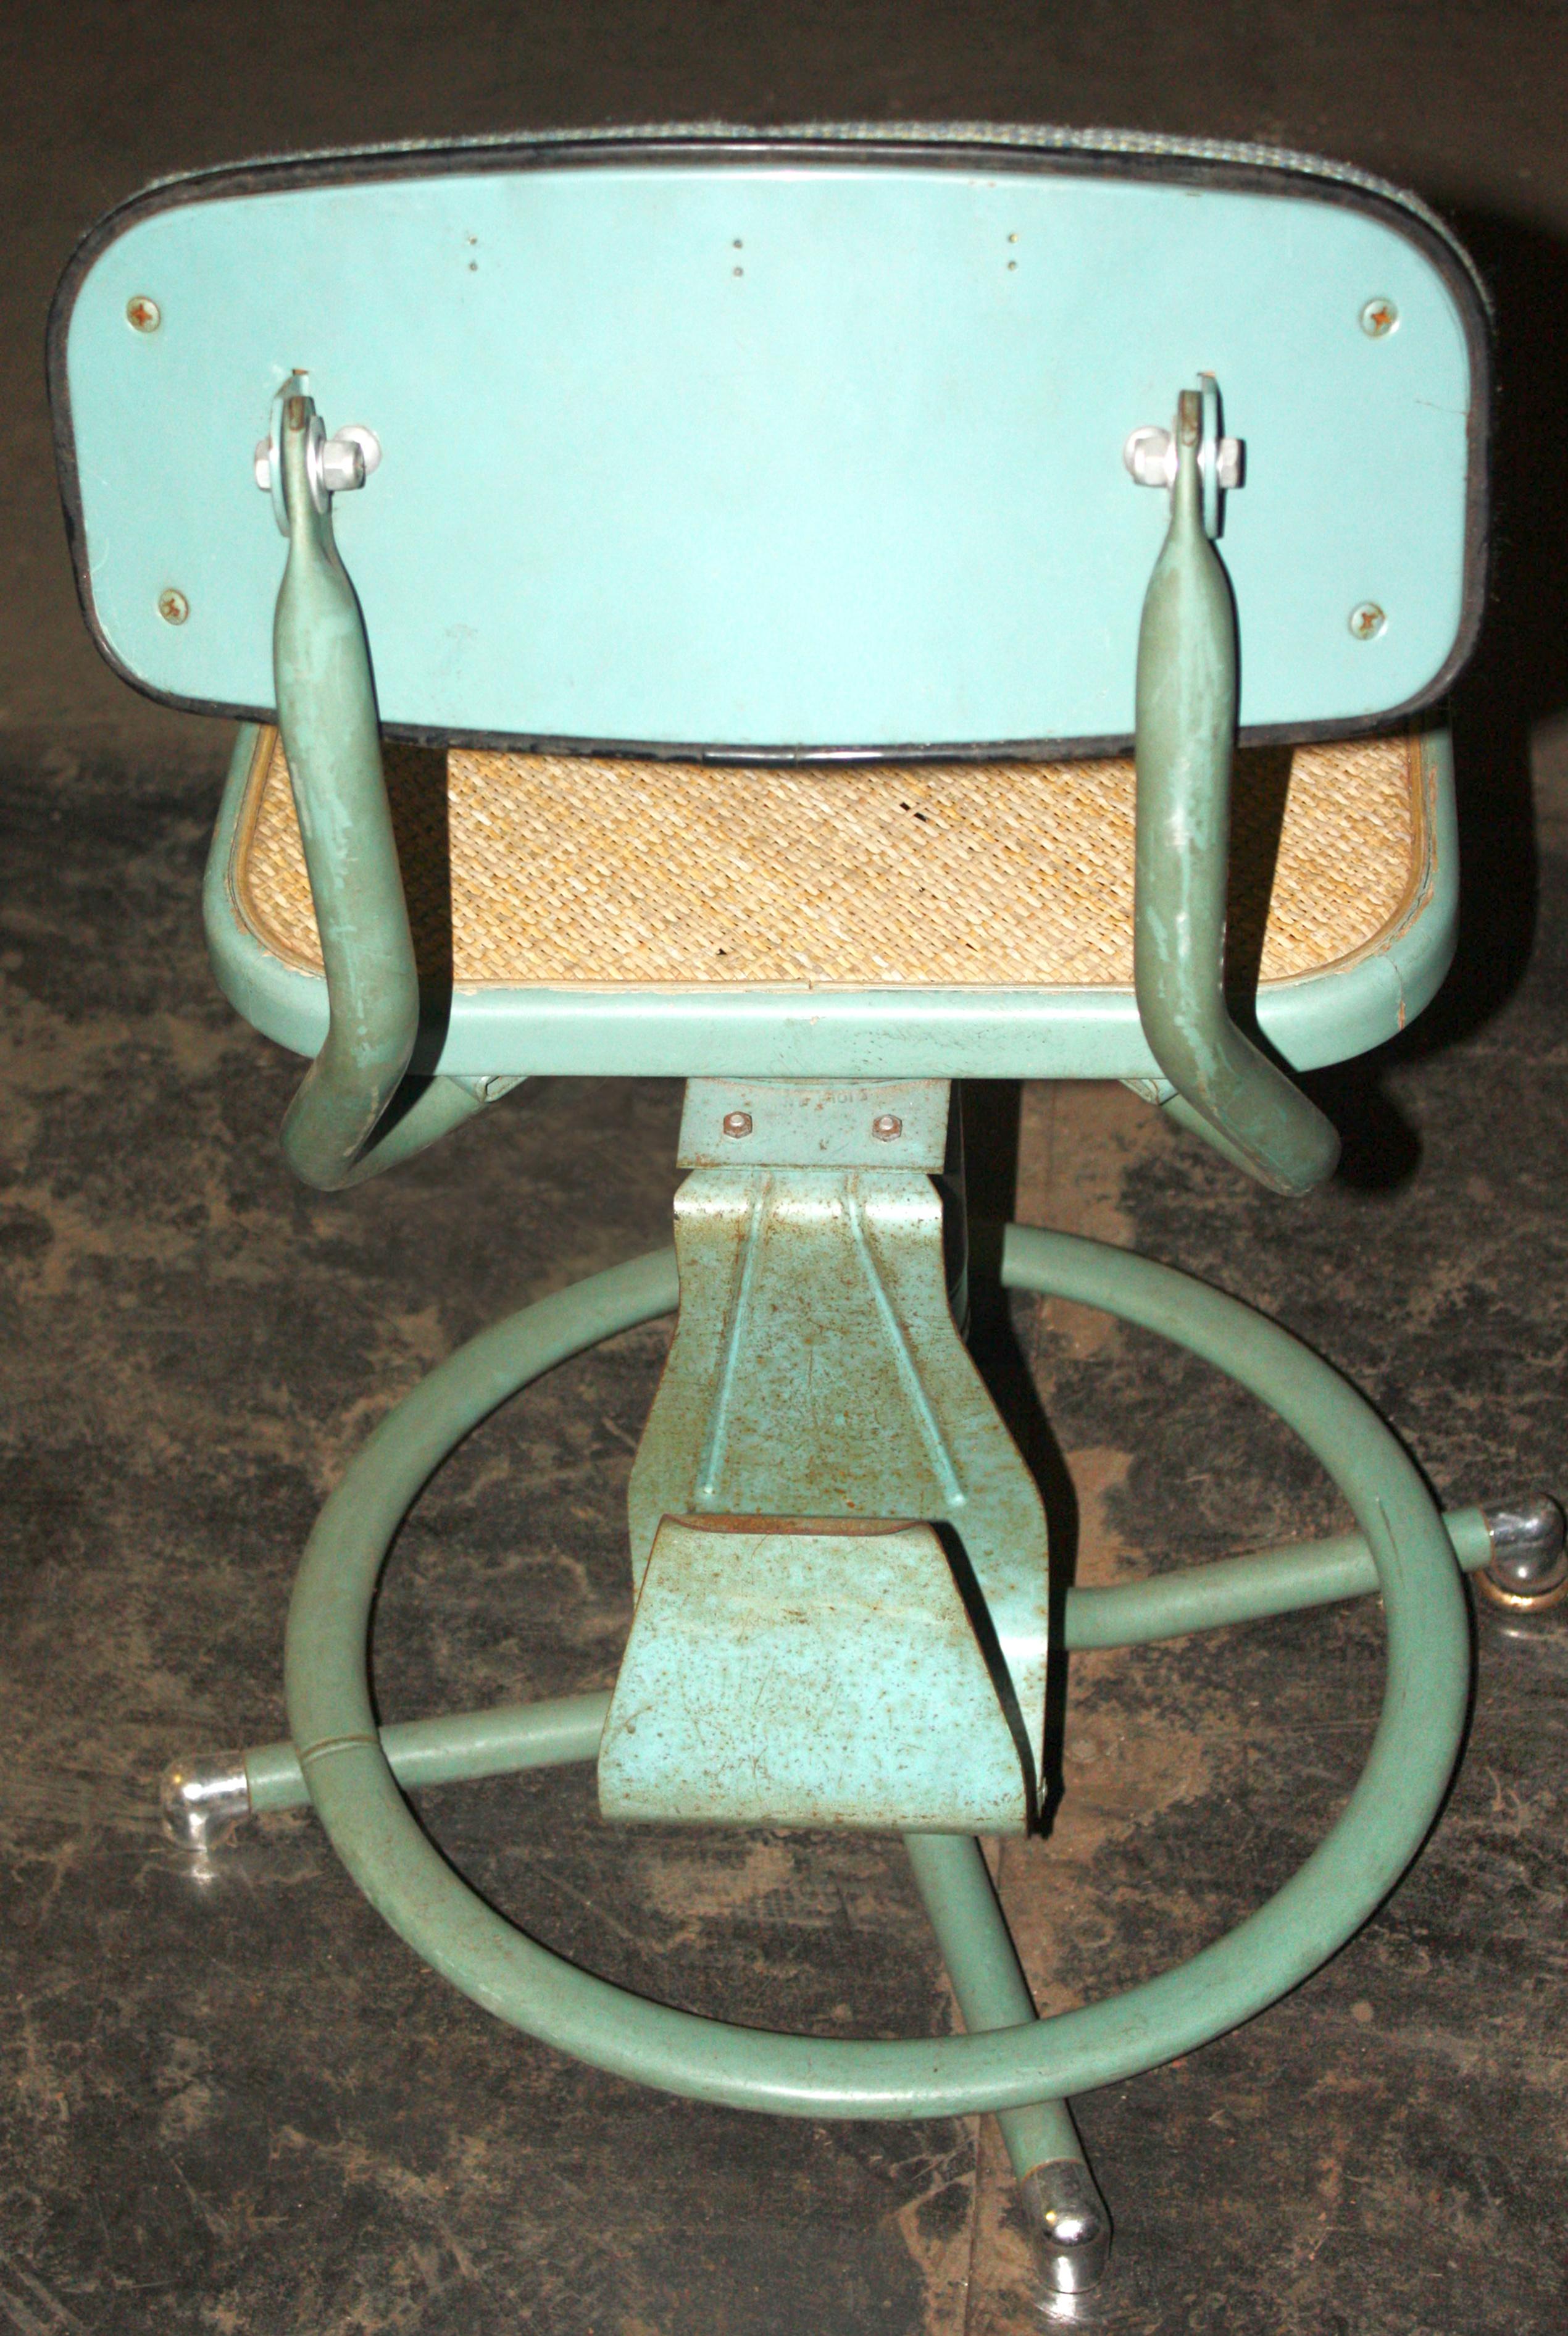 This is an original vintage Western Electric telephone switch board operators stool chair was made circa 1940-1950. Original turquoise enamel finish and caning as well as upholstery on the backrest. The useable height of this chair is 19.5 inches to